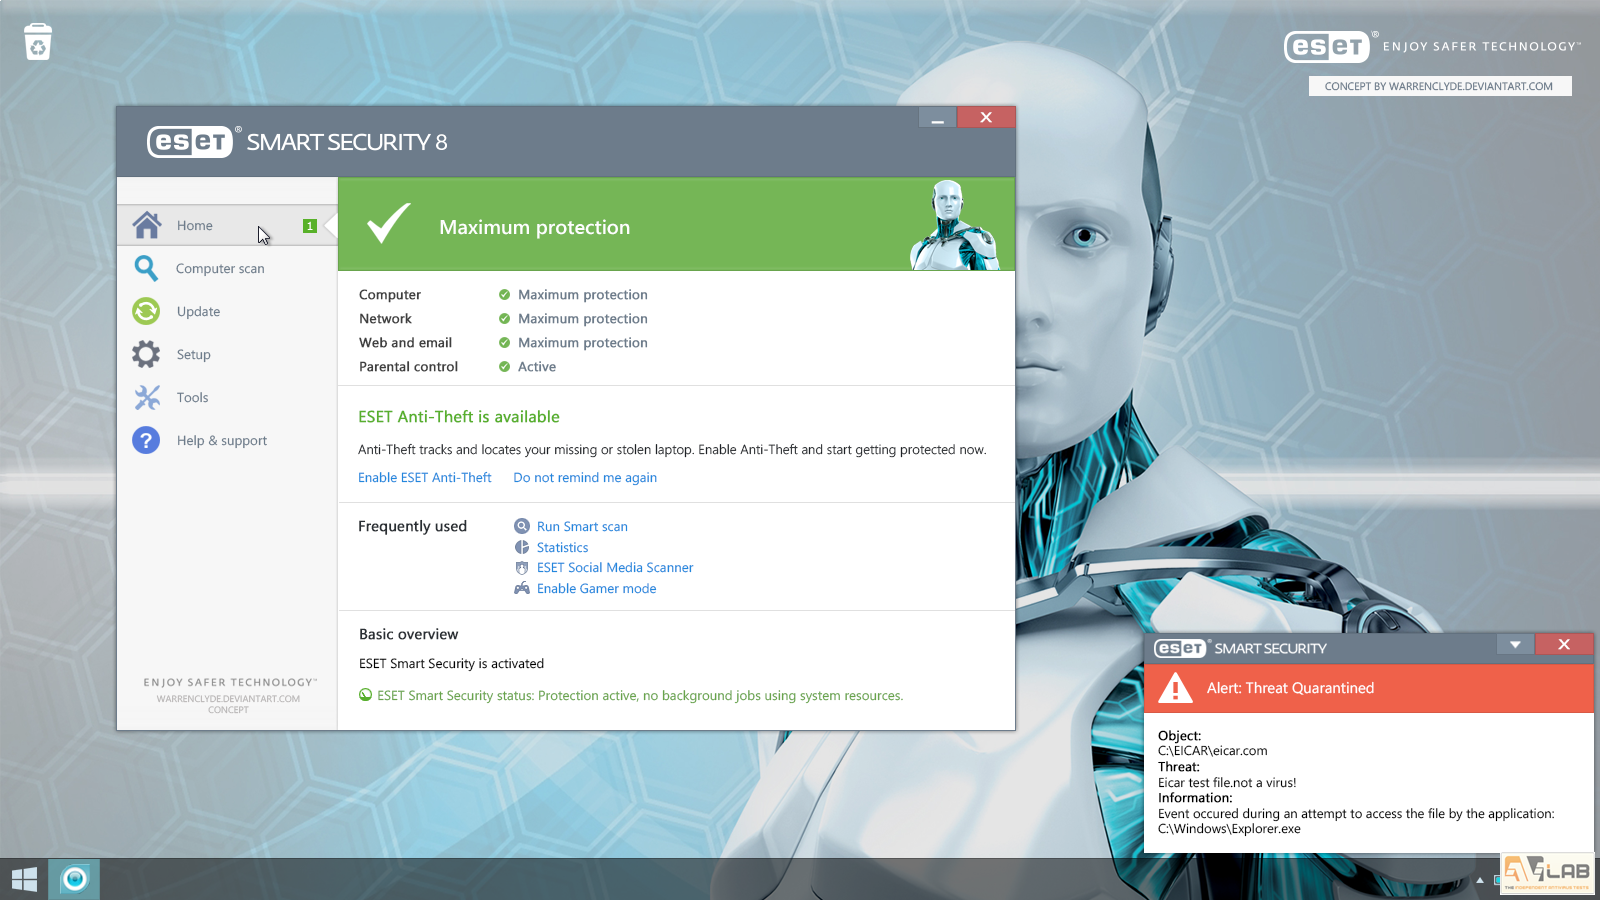 eset smart security 8 ui concept by warrenclyde